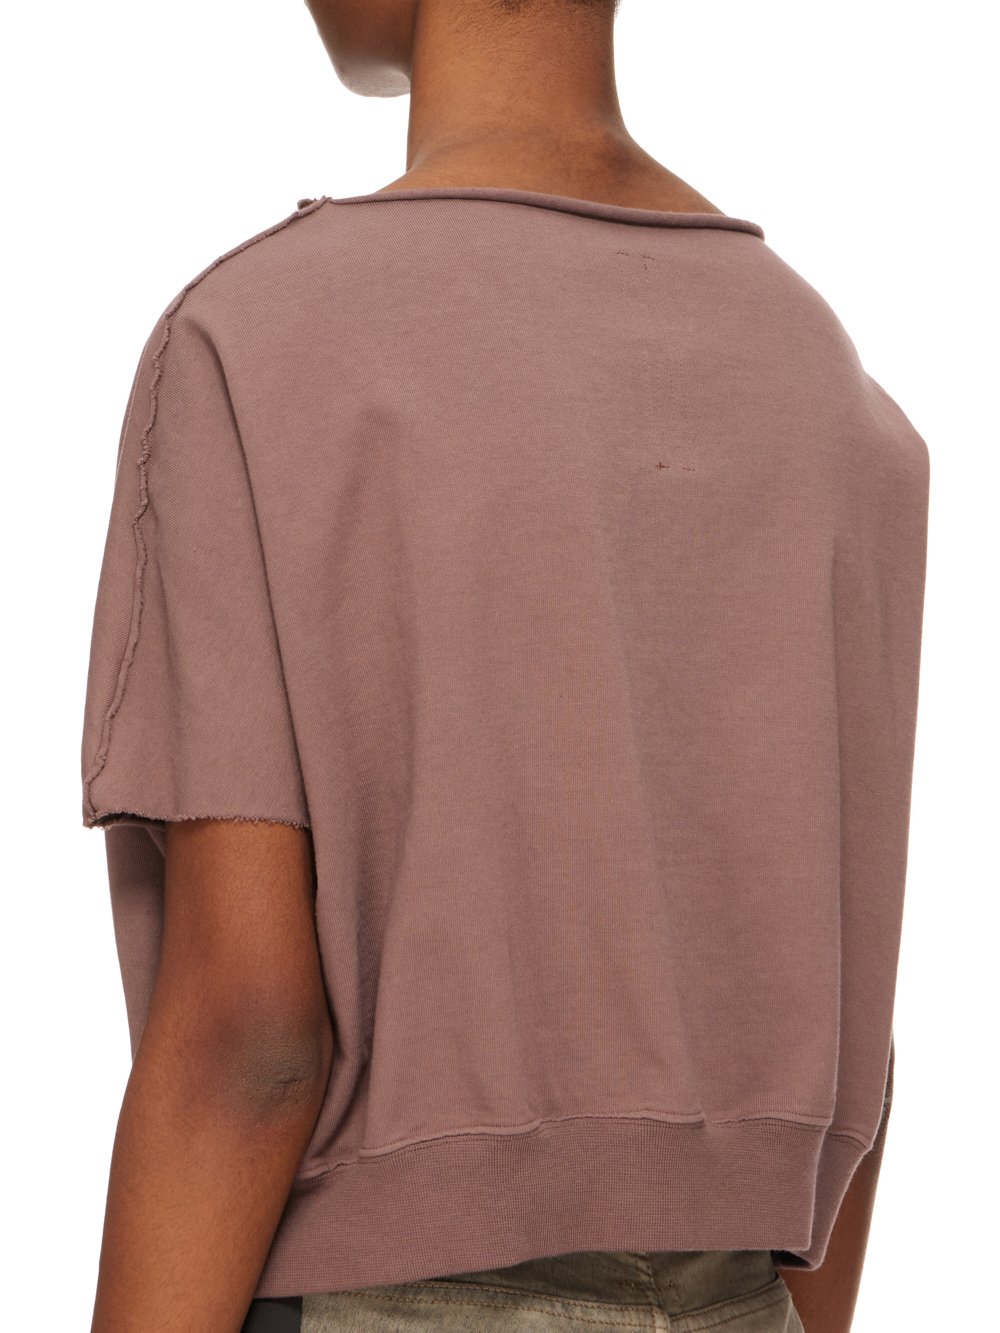 DRKSHDW FW23 LUXOR DAGGER TOP IN MAUVE COMPACT HEAVY COTTON JERSEY